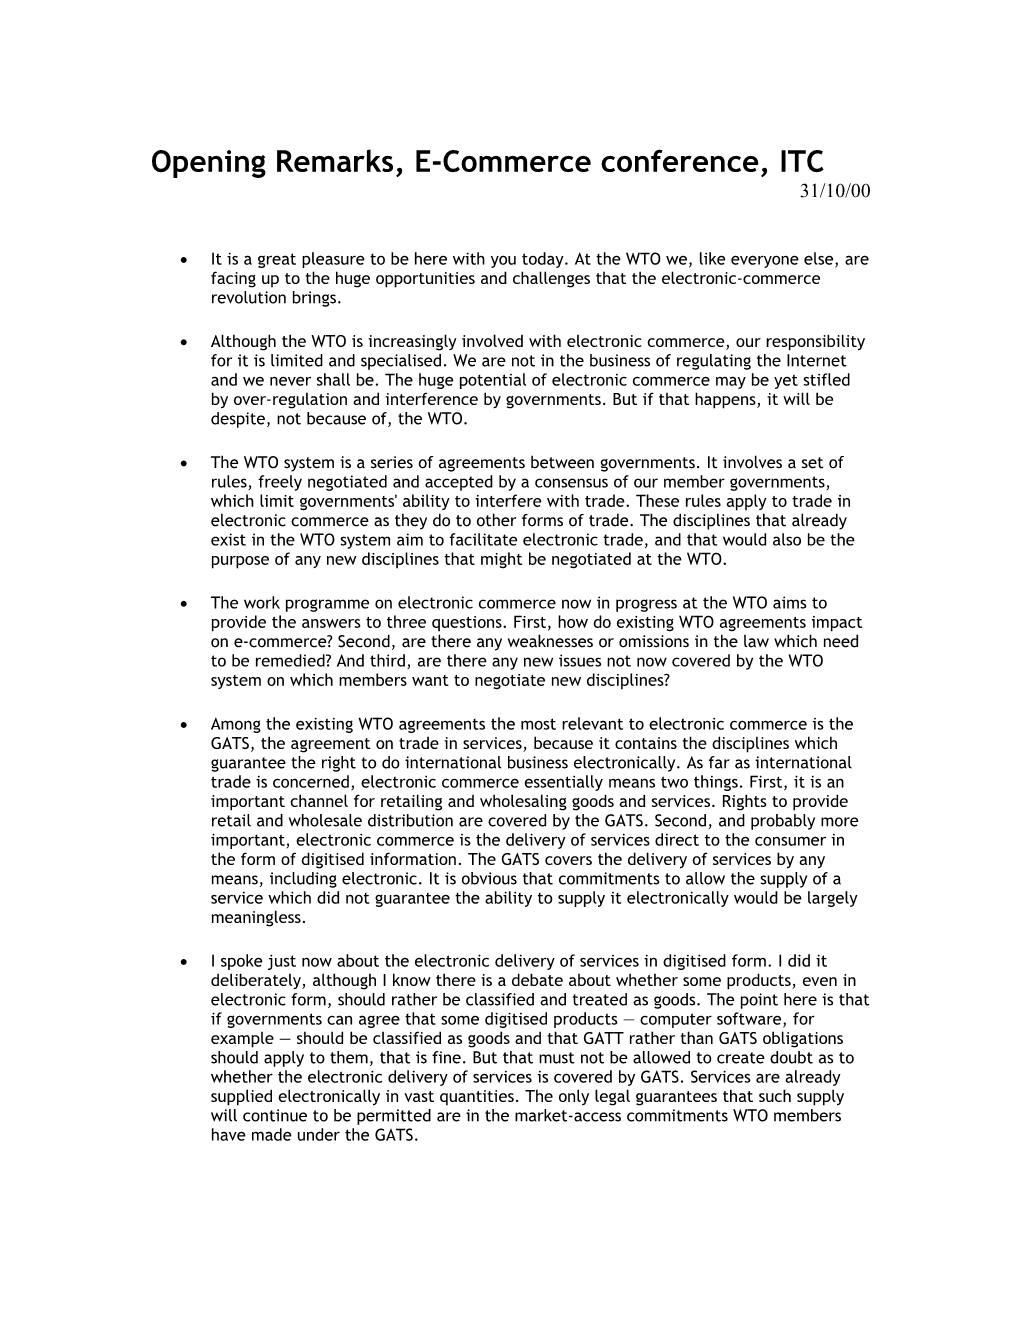 Opening Remarks, E-Commerce Conference, ITC